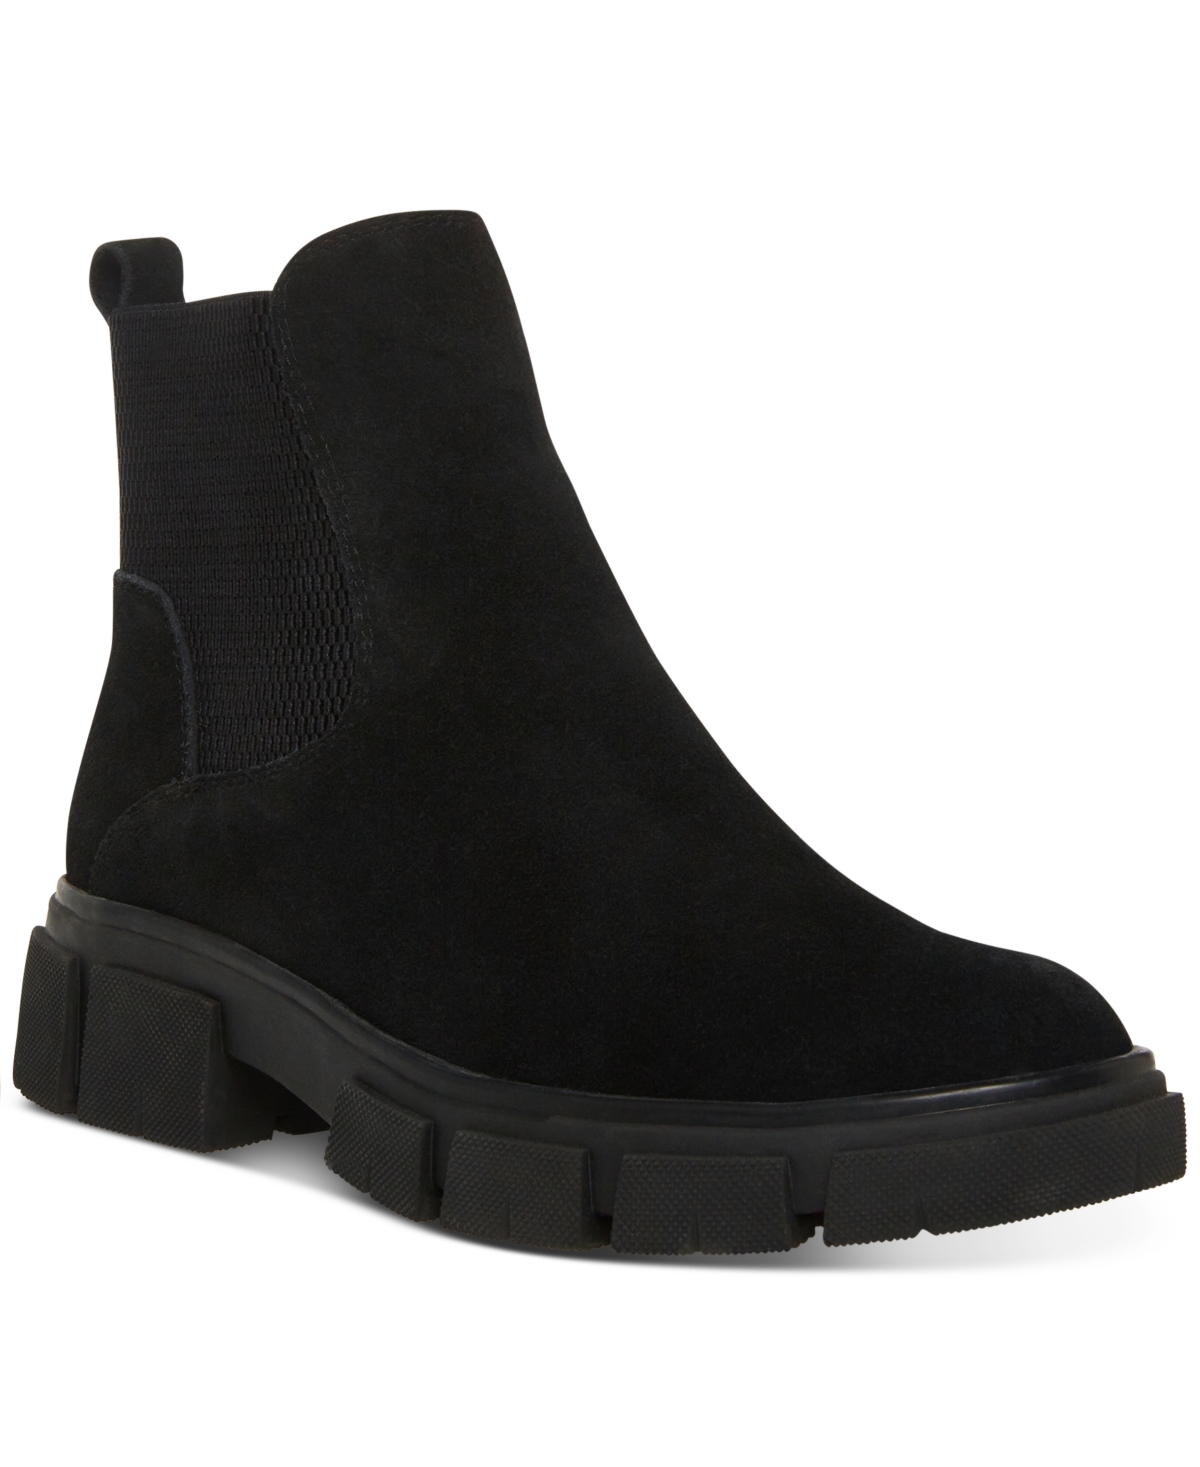 Aqua College Women's Priya Chelsea Boots, Created For Macy's Women's Shoes In Black Sued